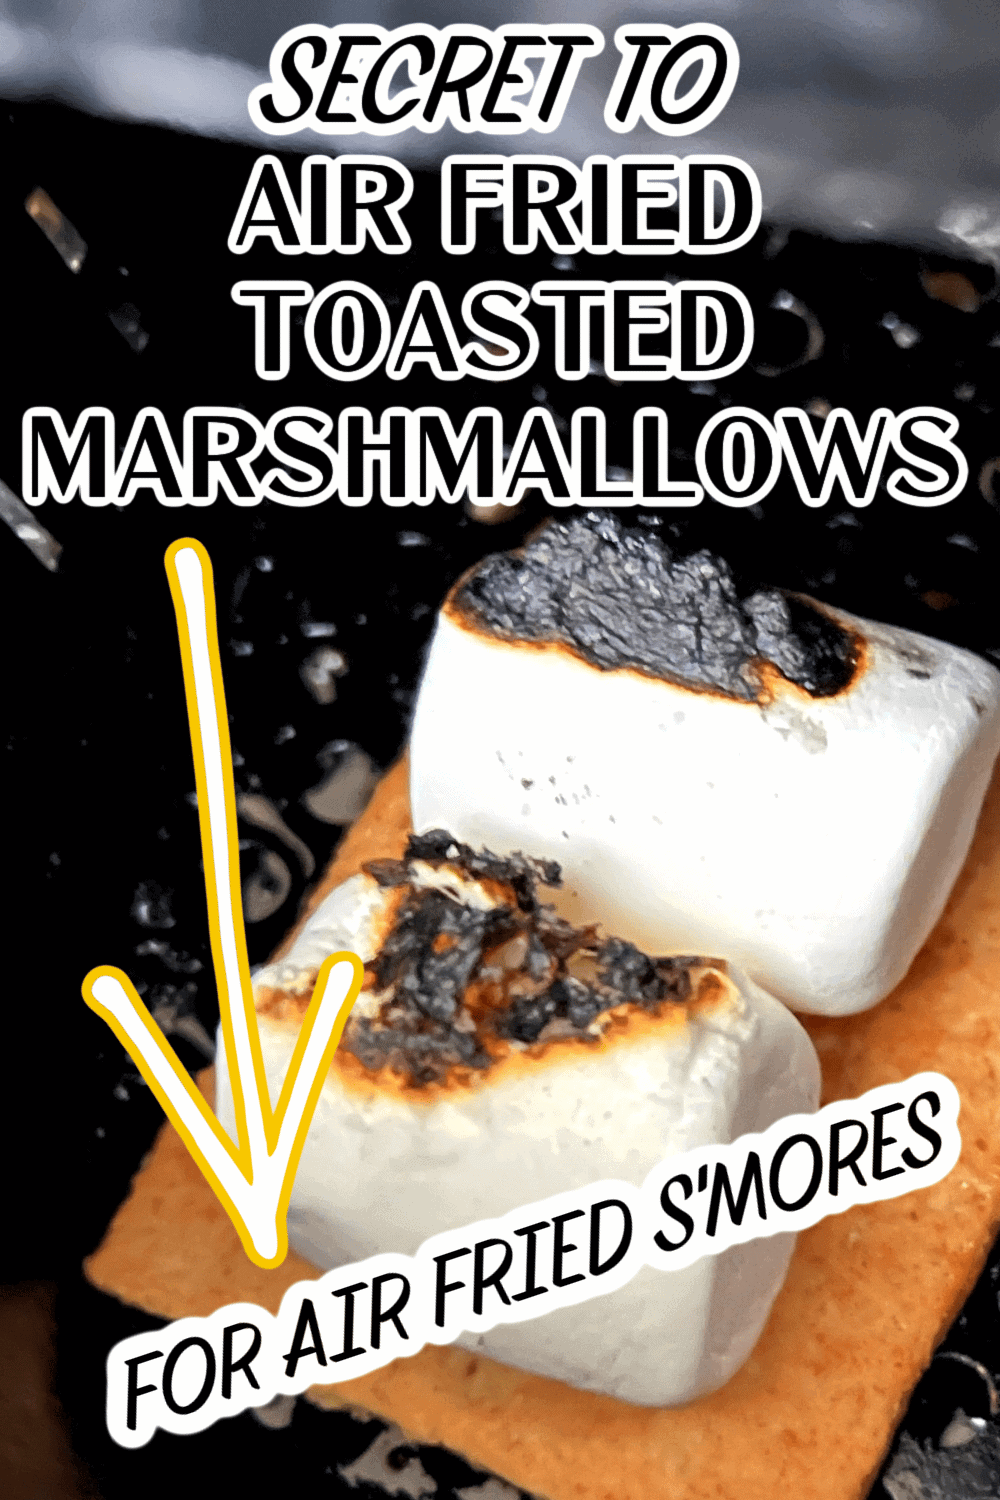 Secret Tip to golden brown marshmallow and how to cook smores in air fryer (text over air fried toasted marshmallow smores in air fryer basket)